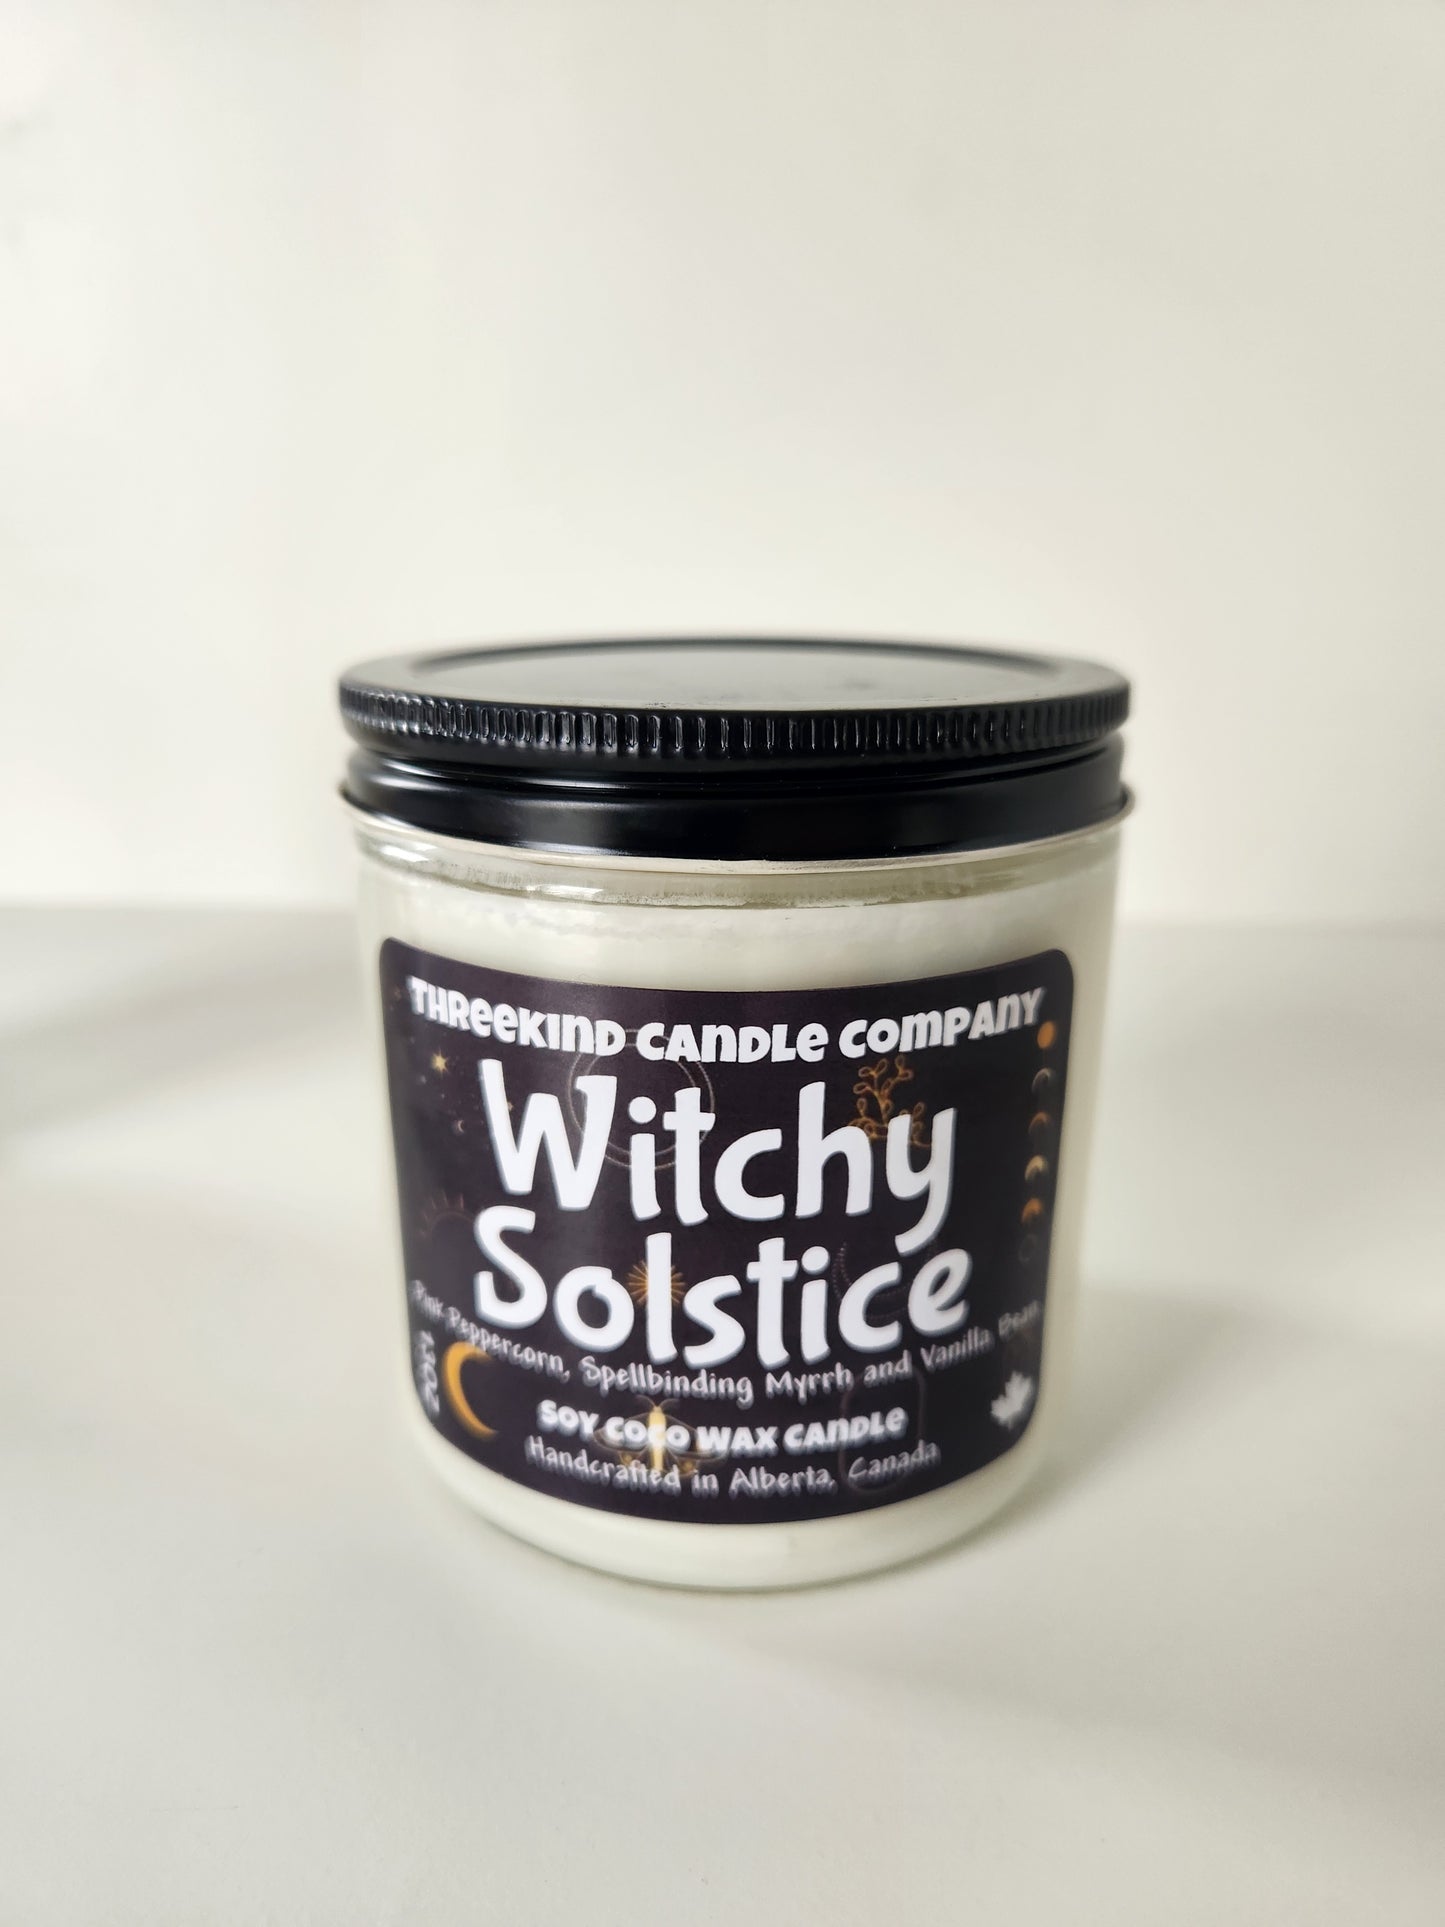 Witchy Solstice